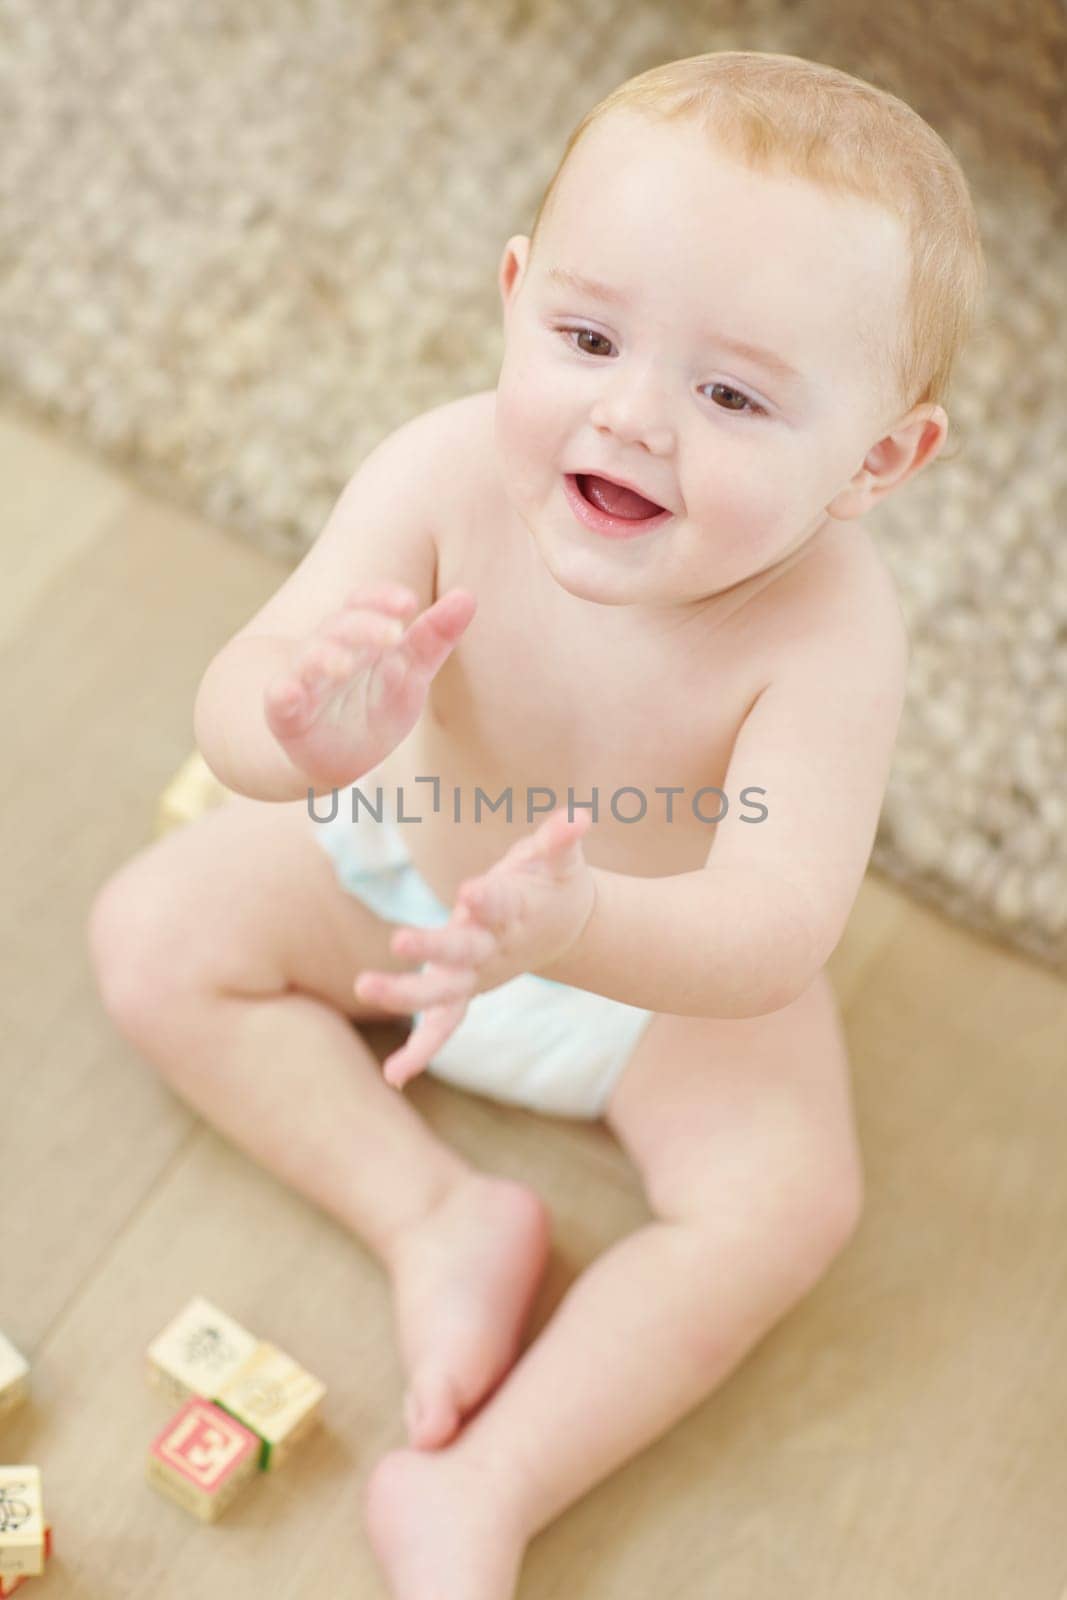 Lets do the clapping song now. A cute little boy clapping his hands with his blocks lying next to him